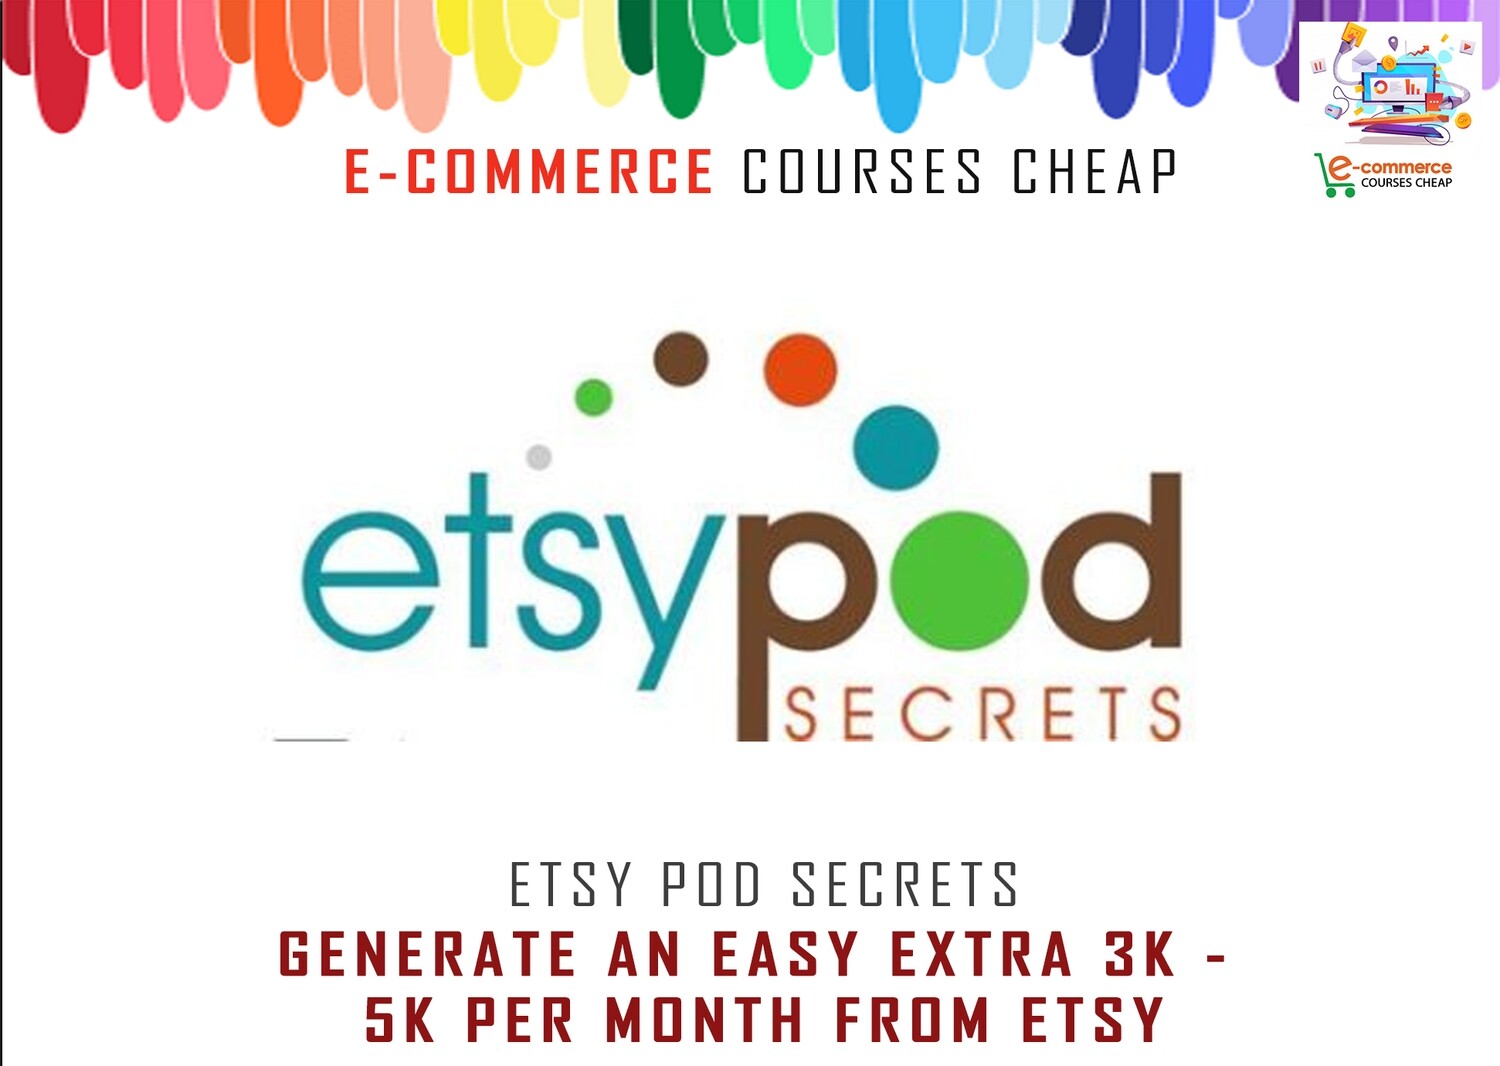 ETSY POD Secrets - Generate An Easy Extra 3K - 5K Per Month From Etsy